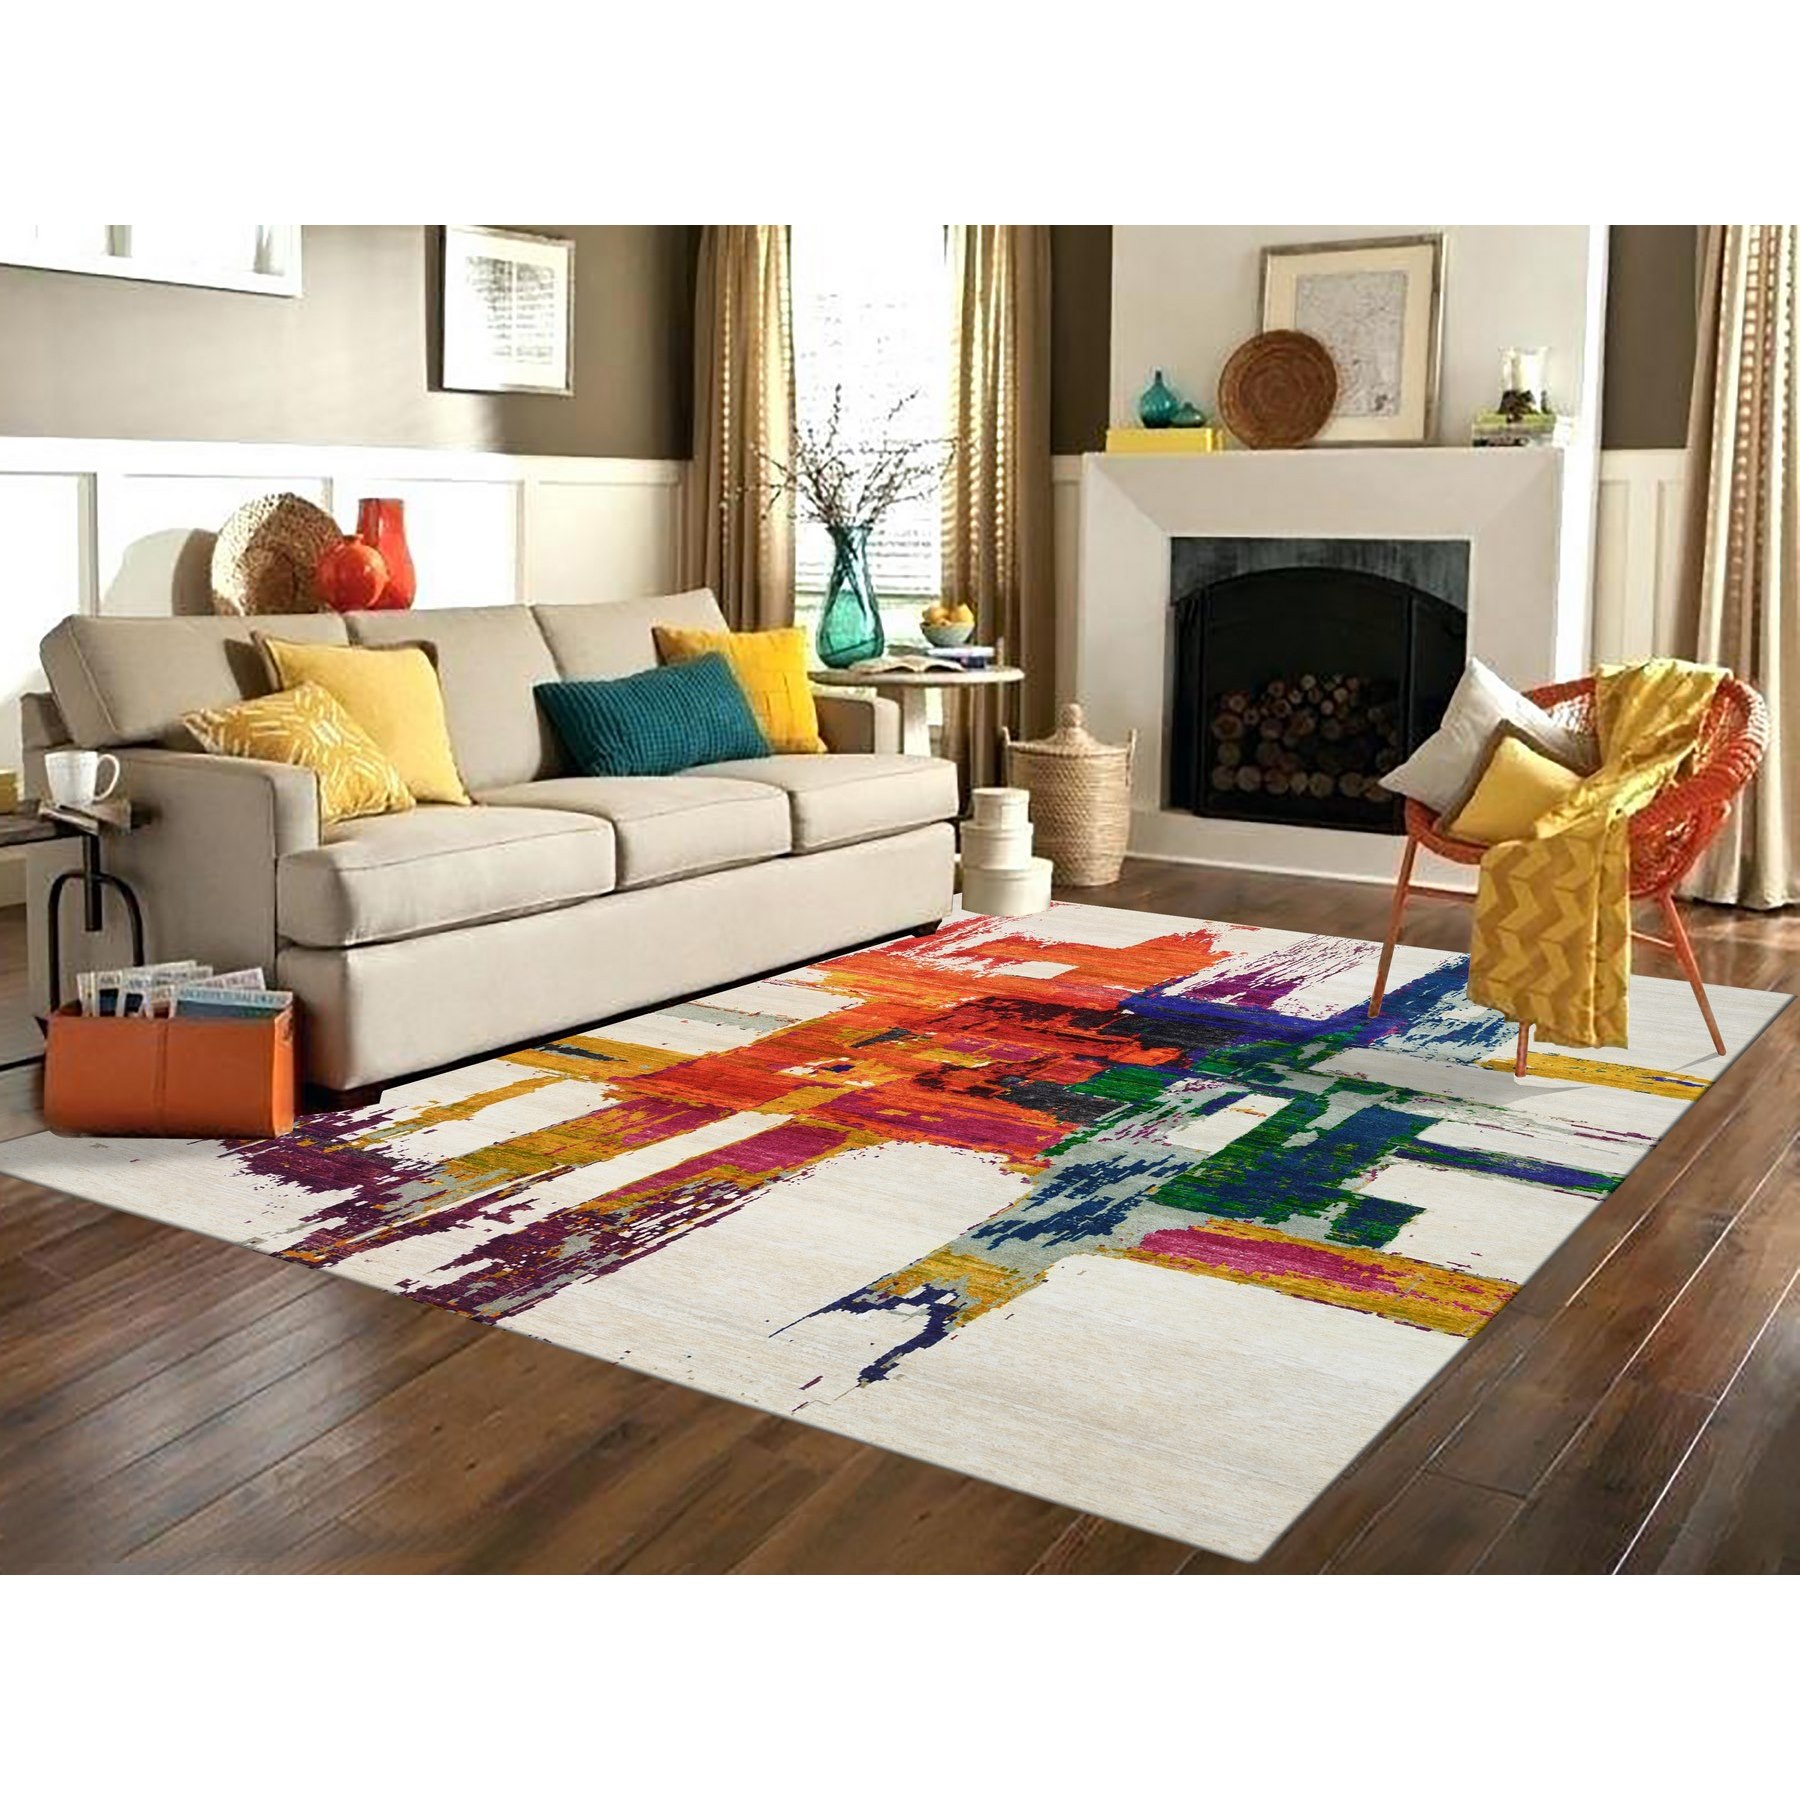 9'x12' Colorful, Wool and Silk Hand Woven, Abstract Design Hi-Low Pile, Oriental Rug 